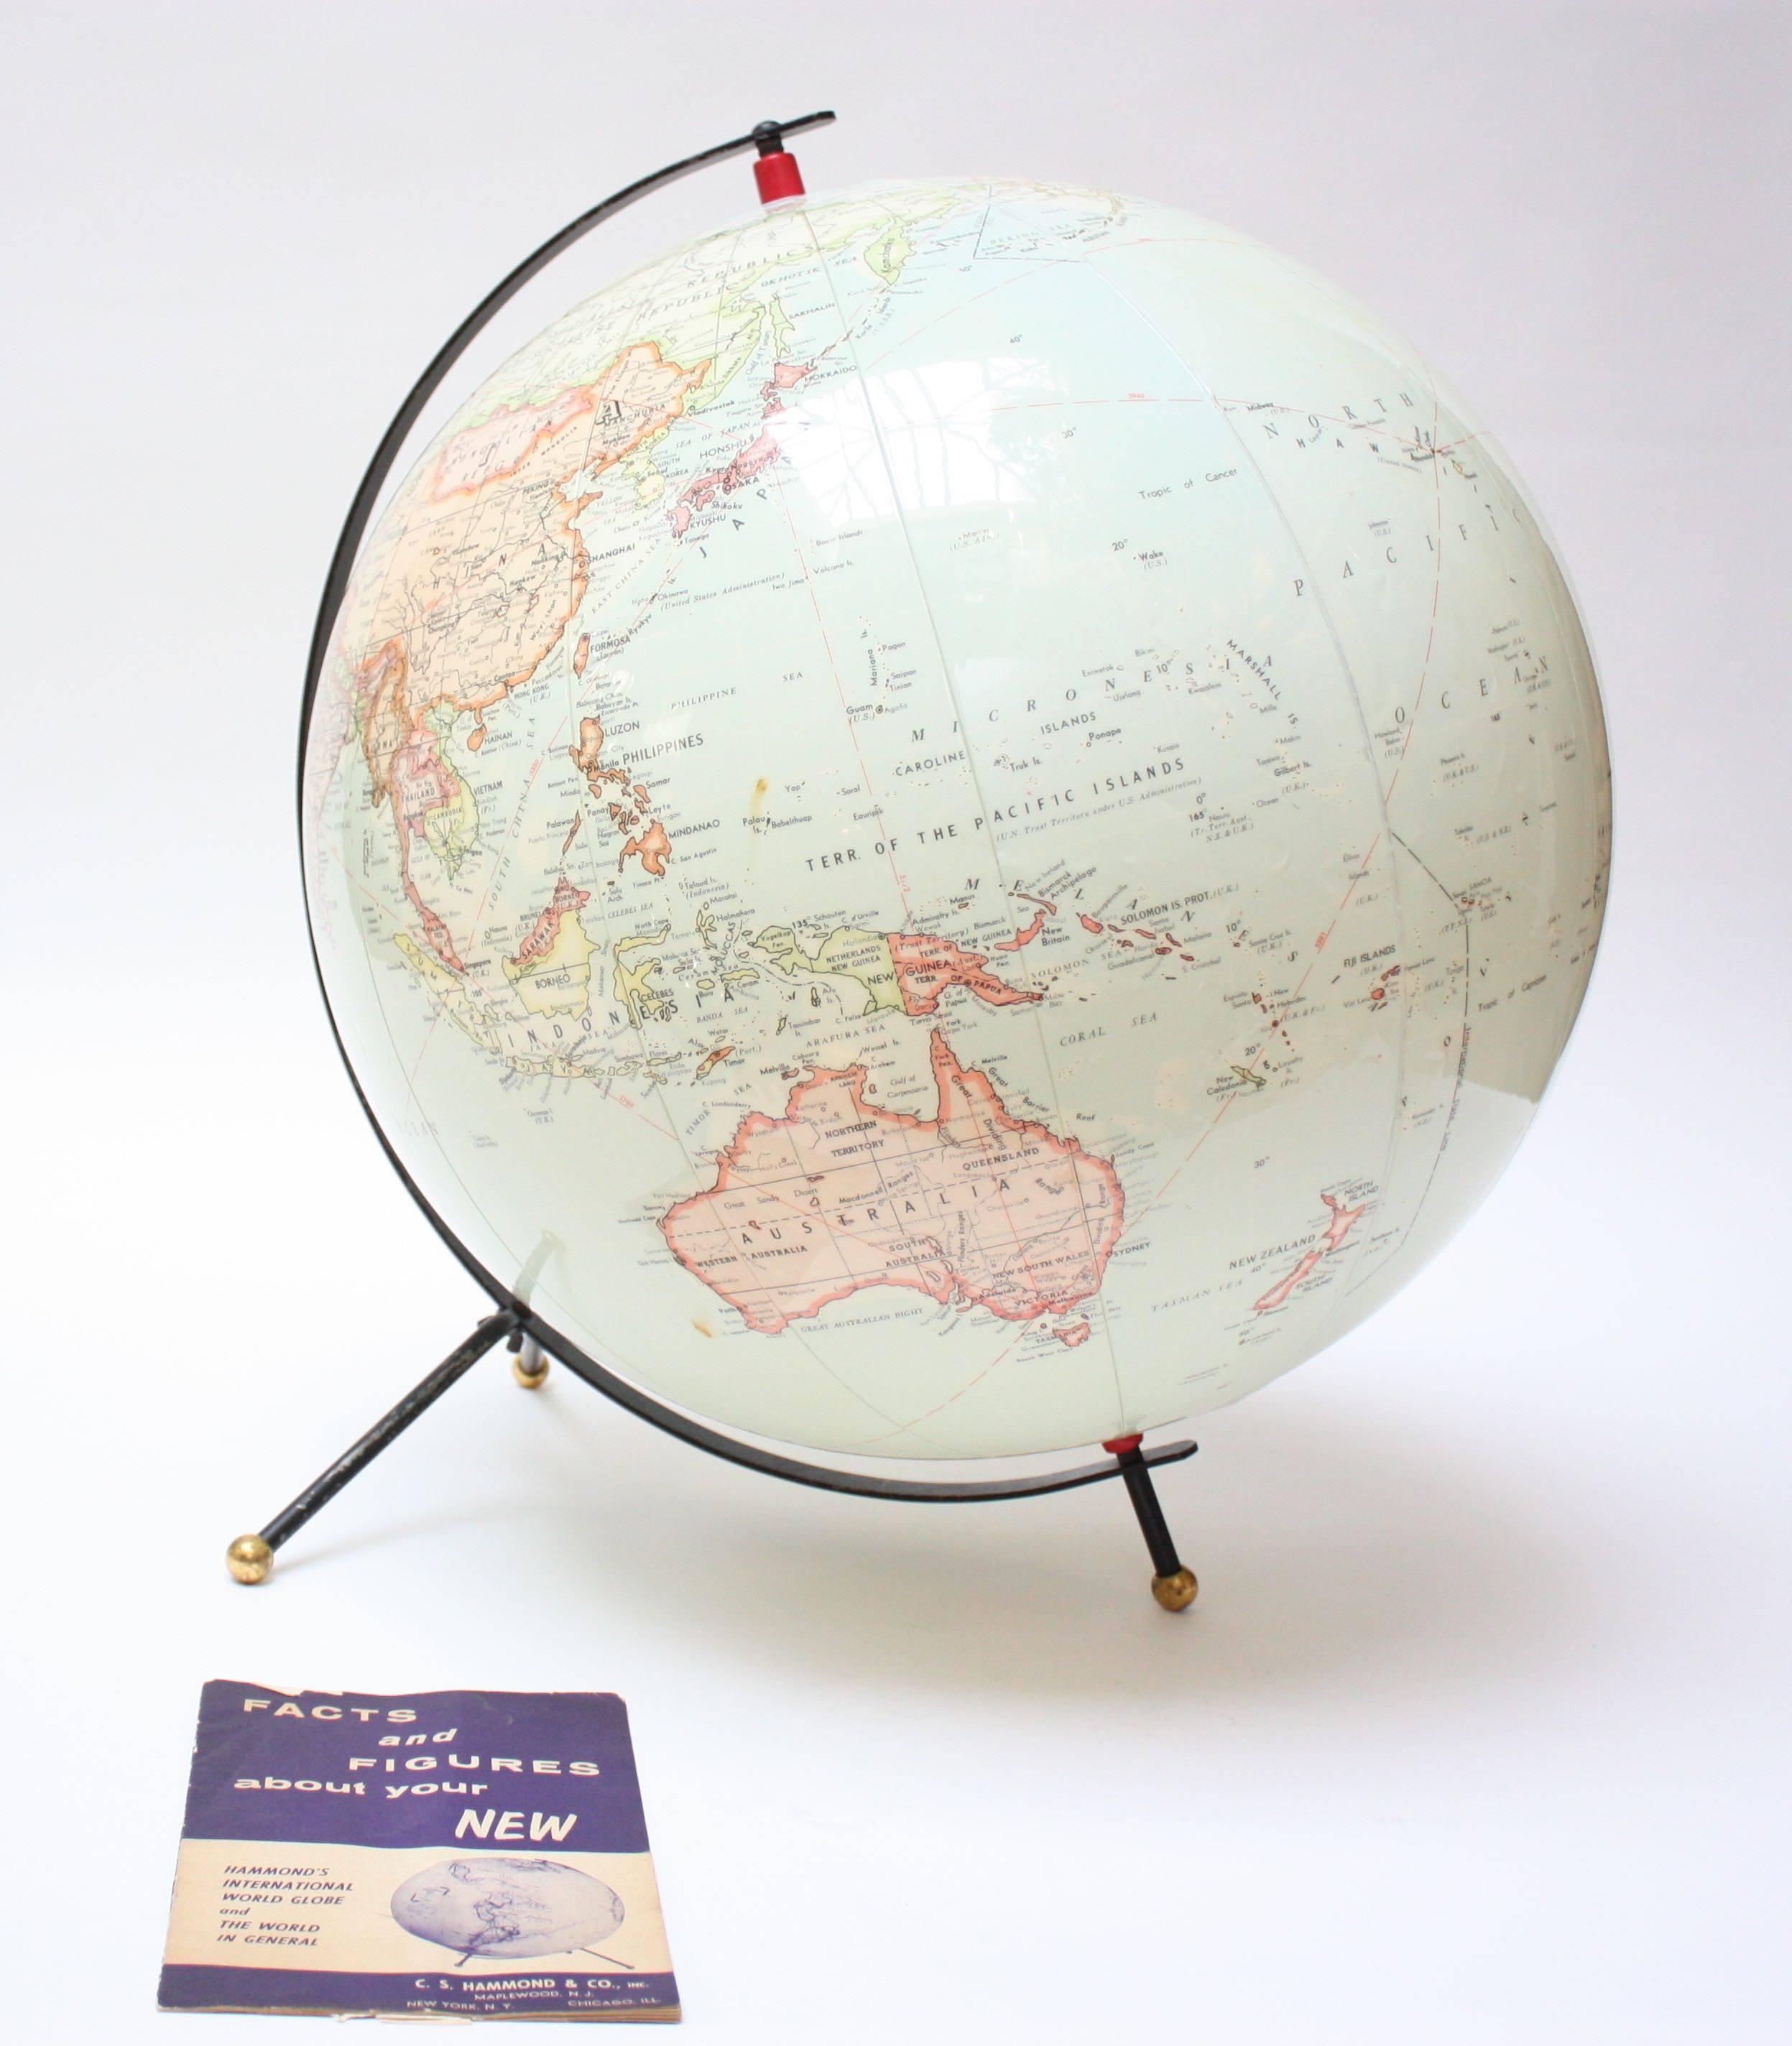 Hammond's International Globe (ca. 1955) composed of an inflatable globe on painted metal cradle. Images and font are large in scale and very legible. As durable as a beach ball, this vinyl globe is inflatable / deflatable by means of a locking port